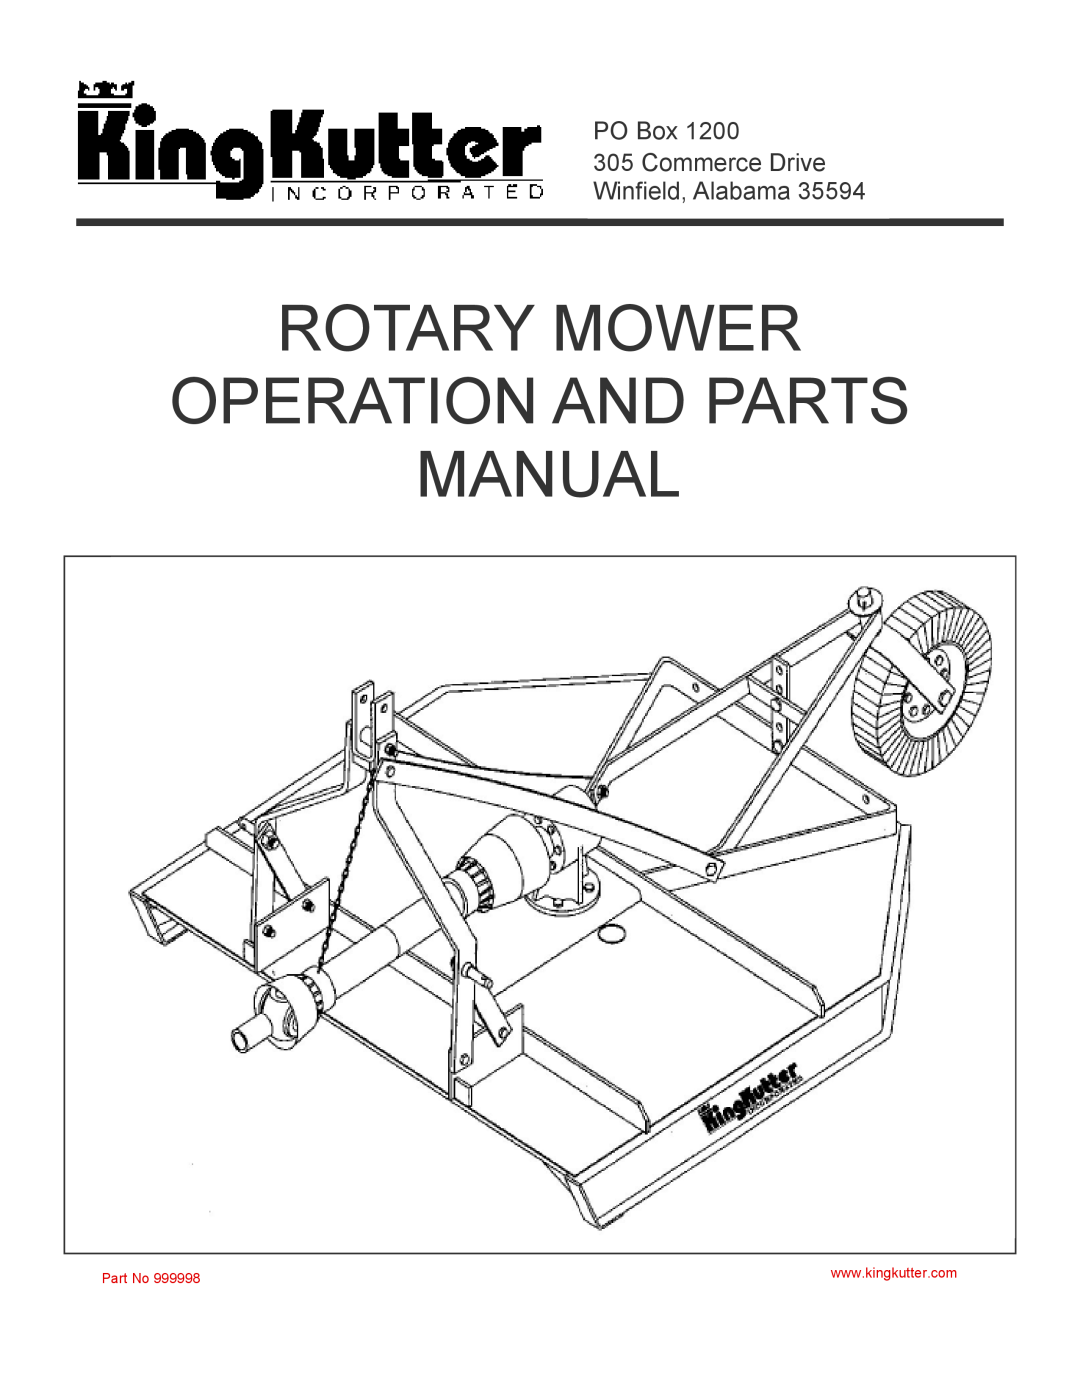 King Kutter 999998 manual Rotary Mower Operation And Parts Manual, PO Box 305 Commerce Drive Winfield, Alabama 